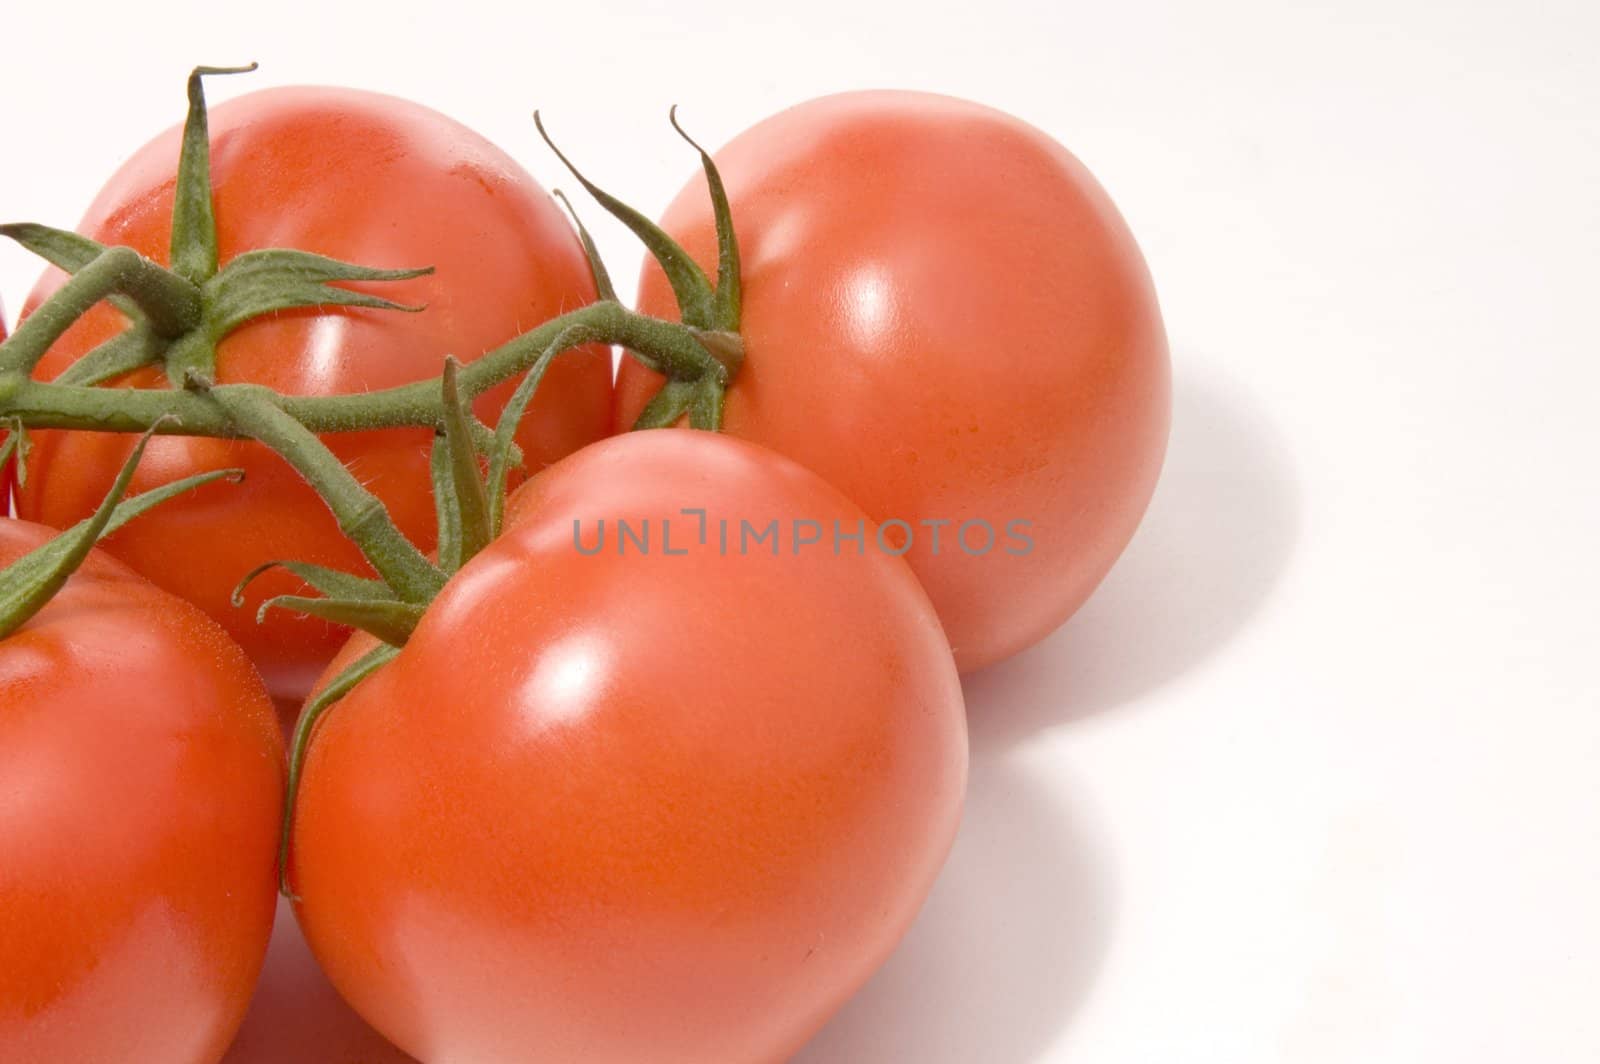 Four red juicy tomatoes on white background